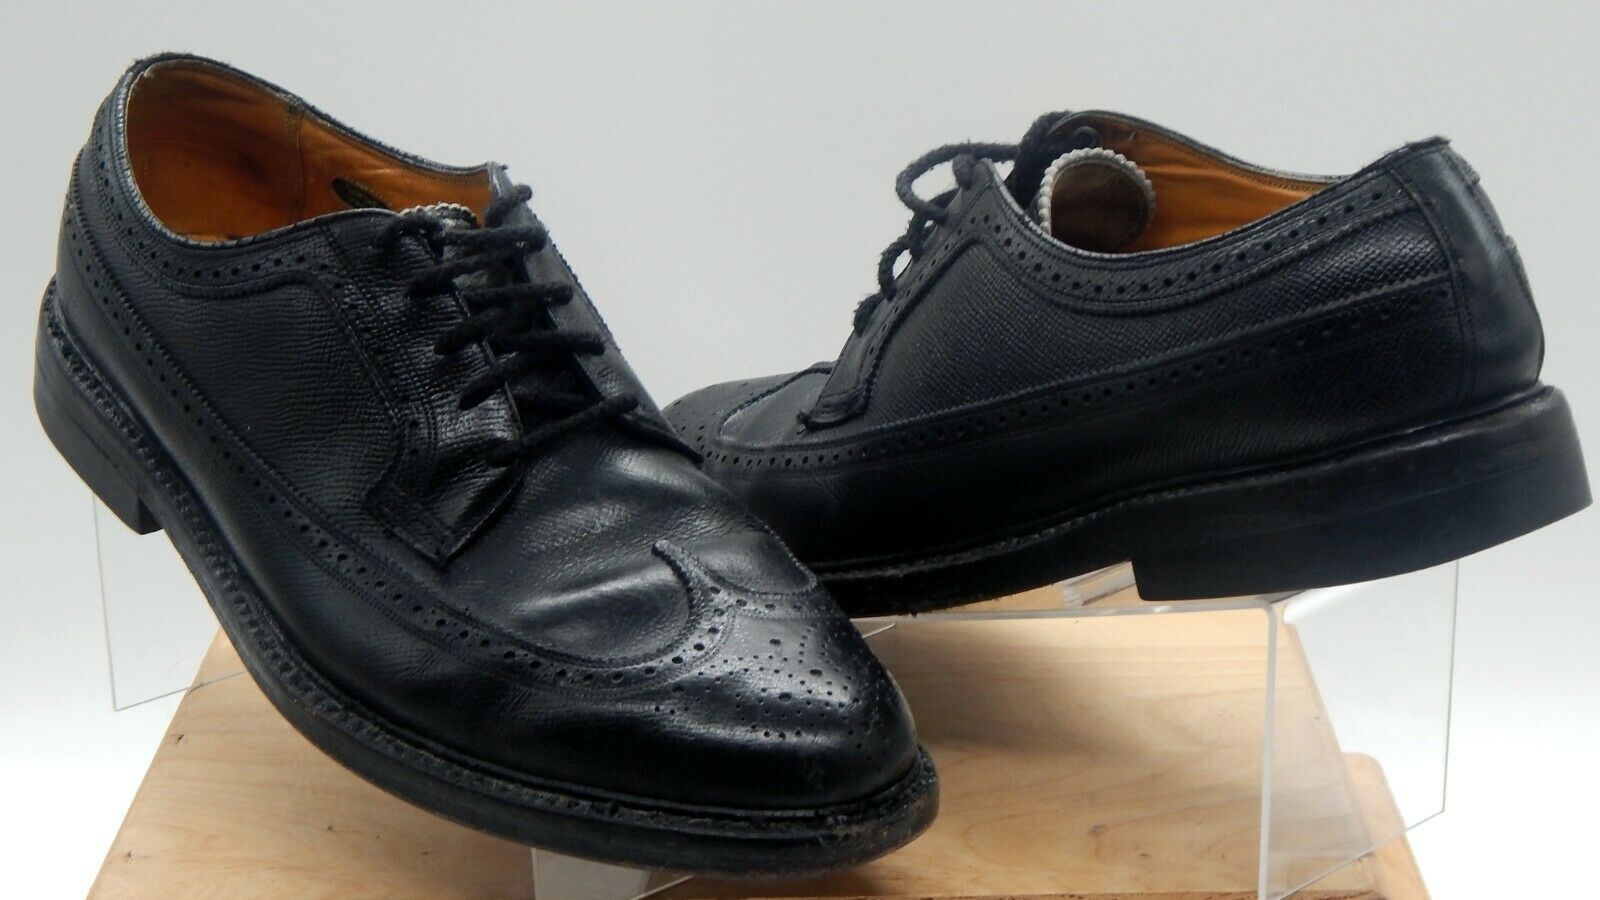 Florsheim Imperial Men's Wingtip Black Shoes 10 -11 3EEE Extra Wide Made In USA